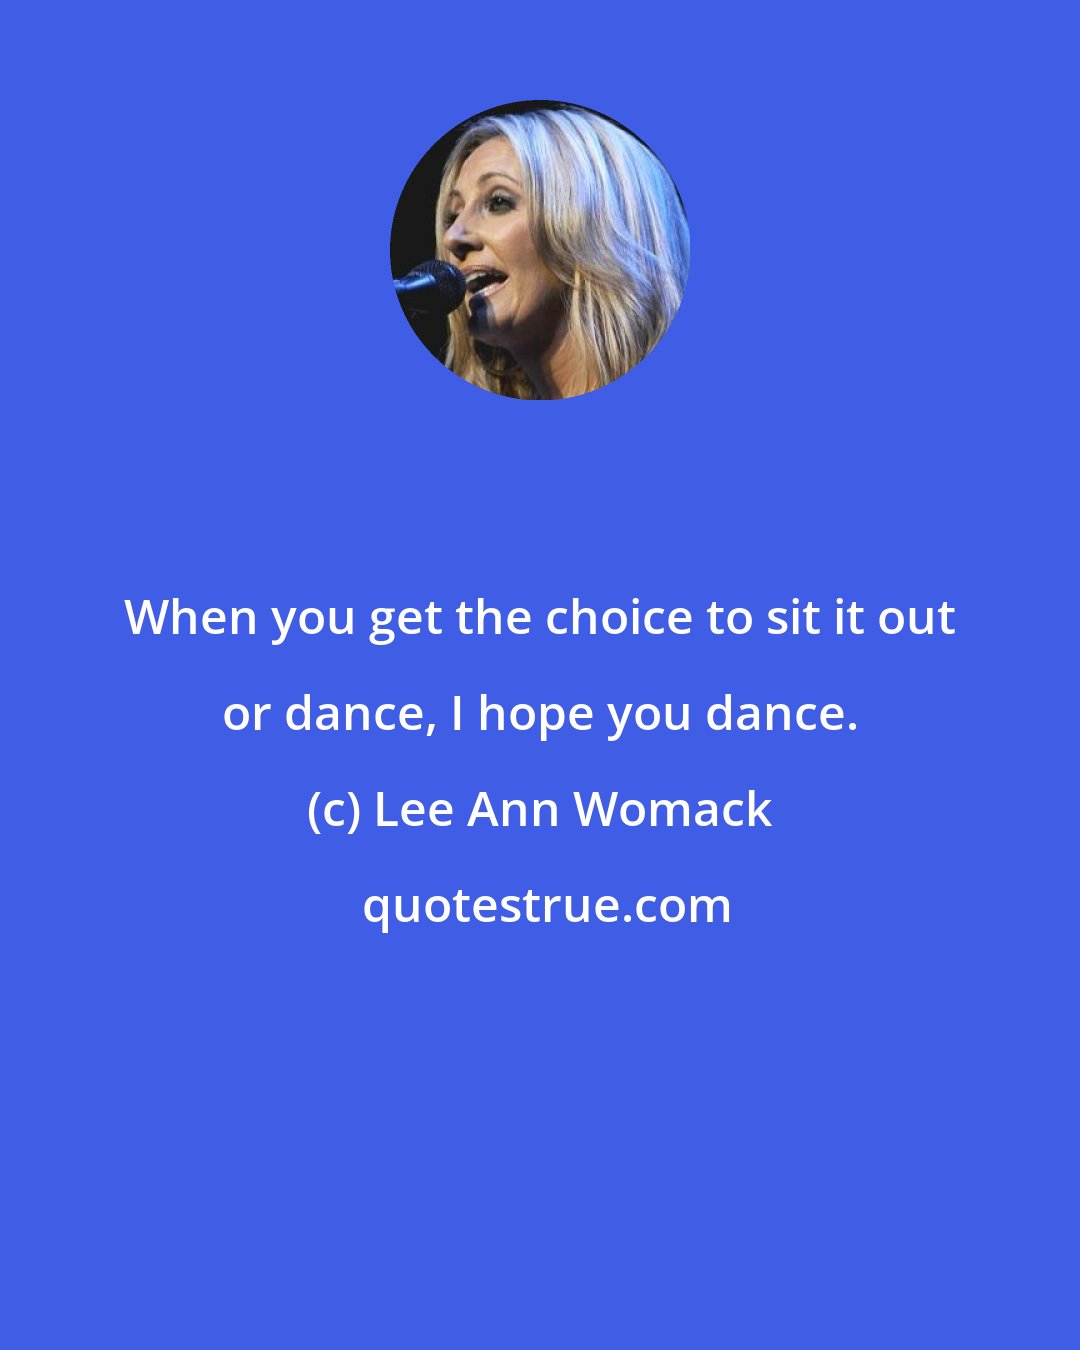 Lee Ann Womack: When you get the choice to sit it out or dance, I hope you dance.